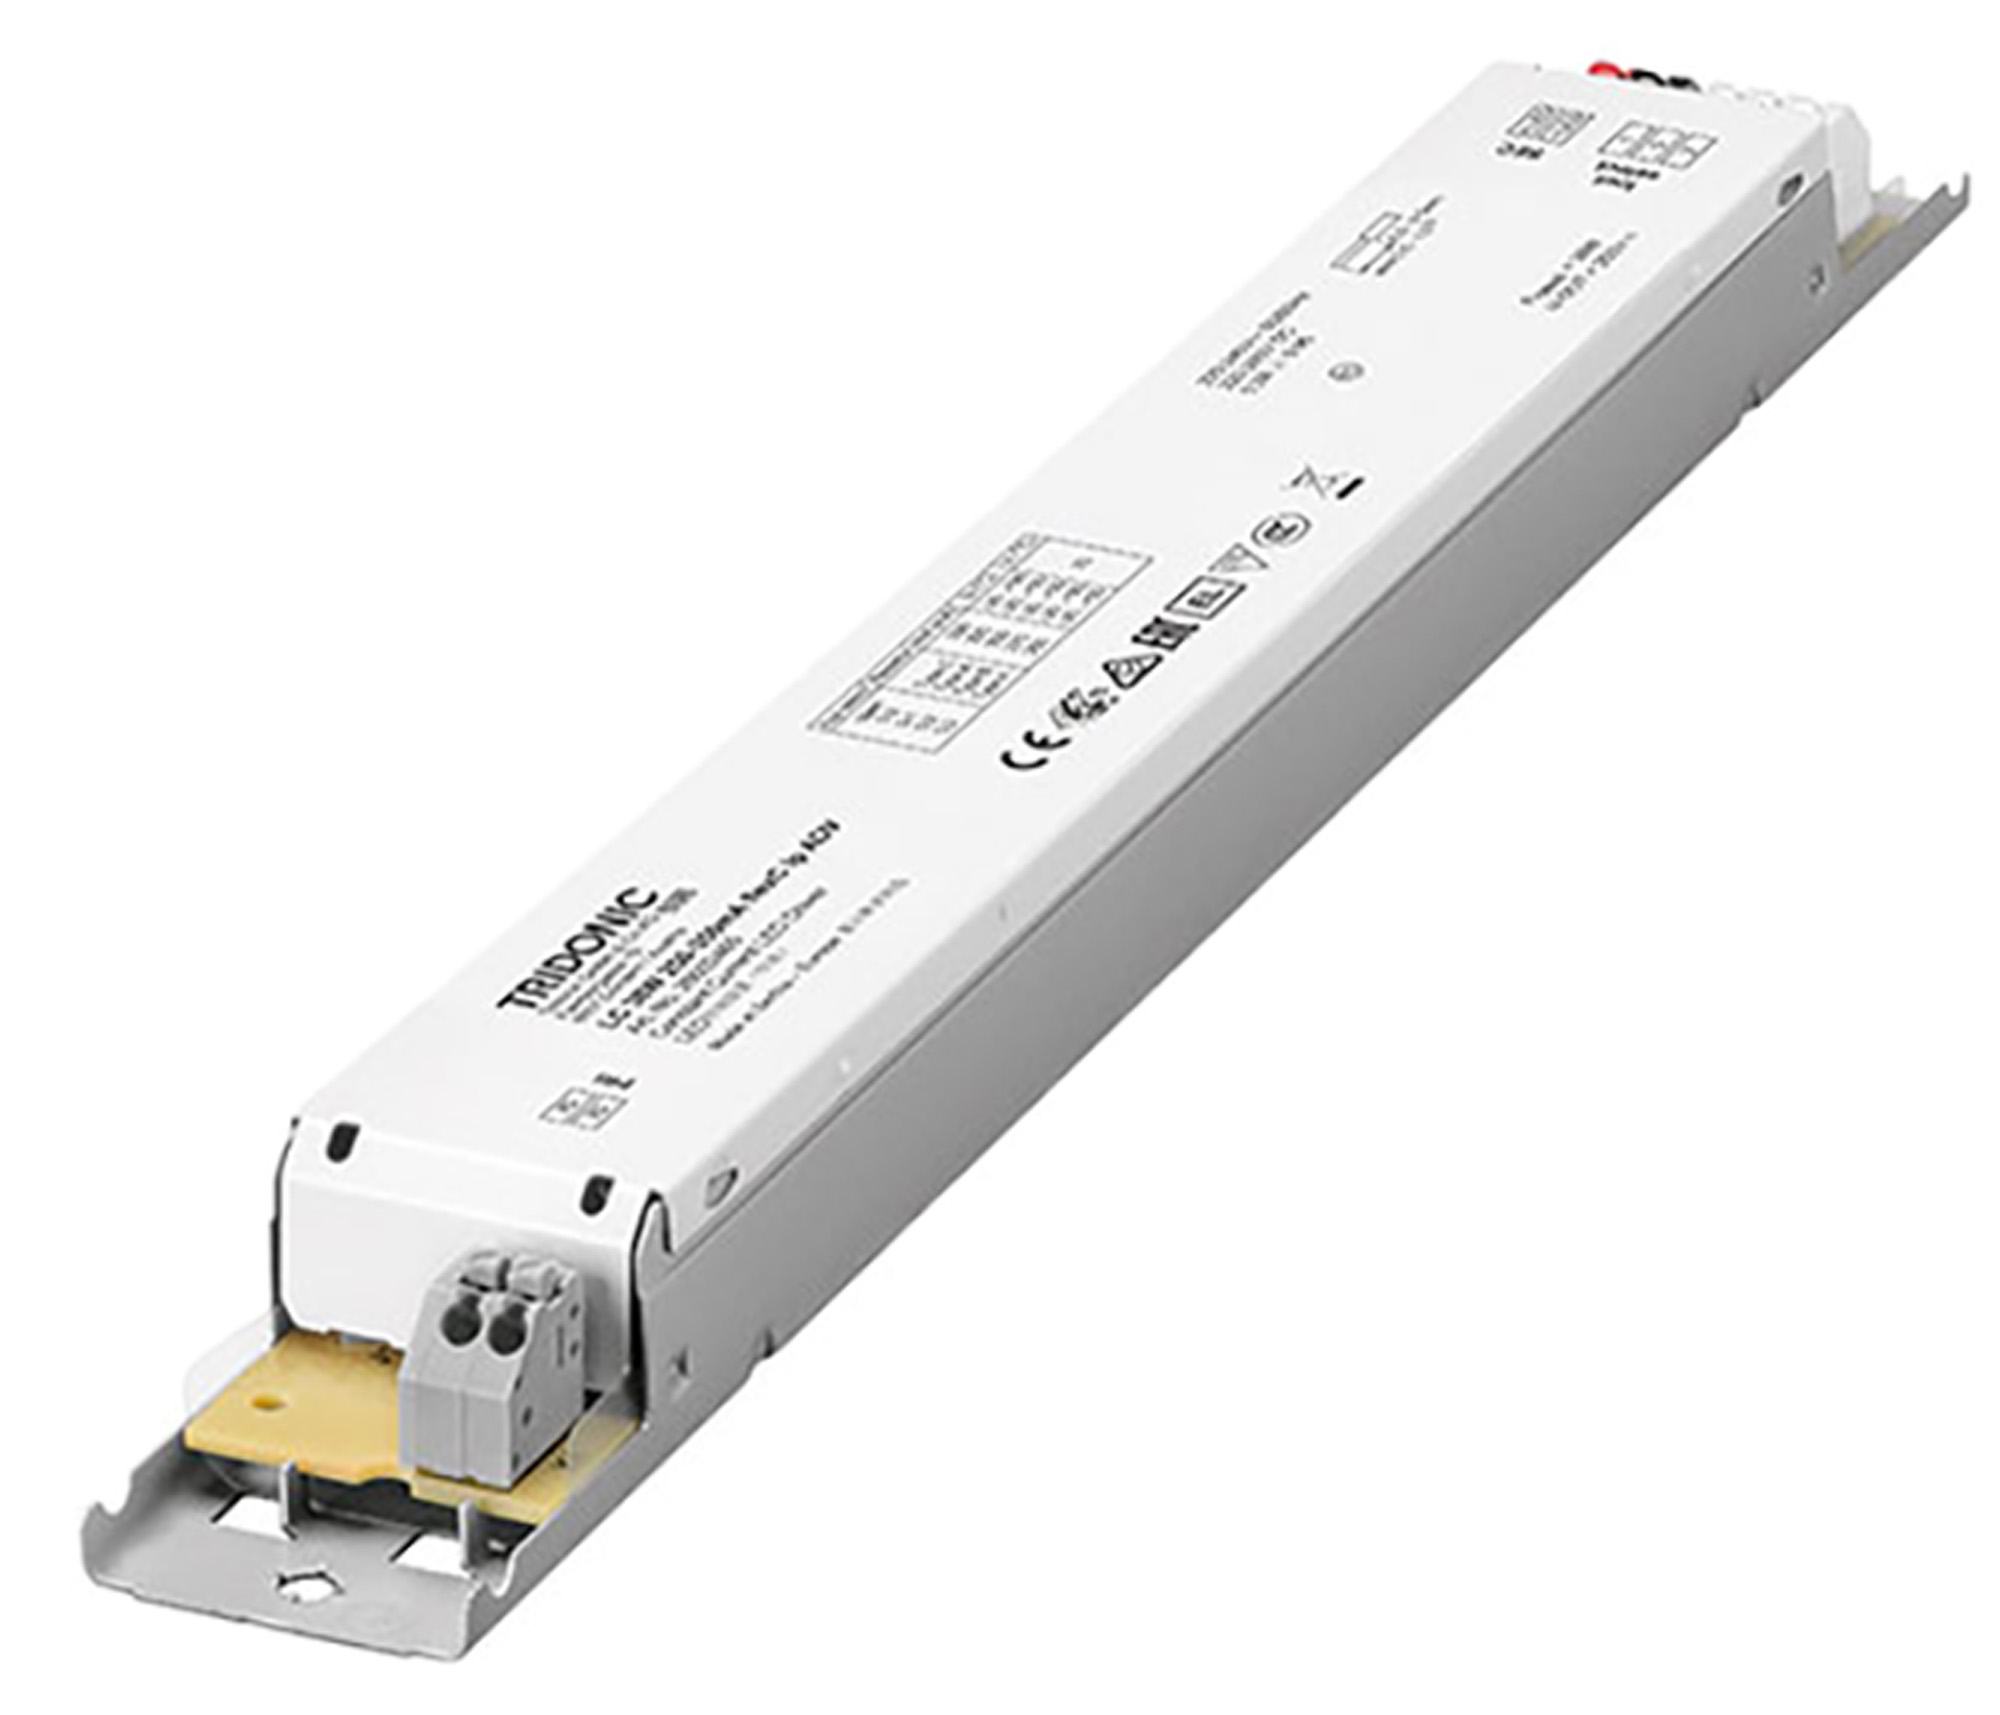 28002465  38W 250-350mA flexC lp ADV Constant Current Fixed current LED Driver, 51V-109Vdc out put, IP20.